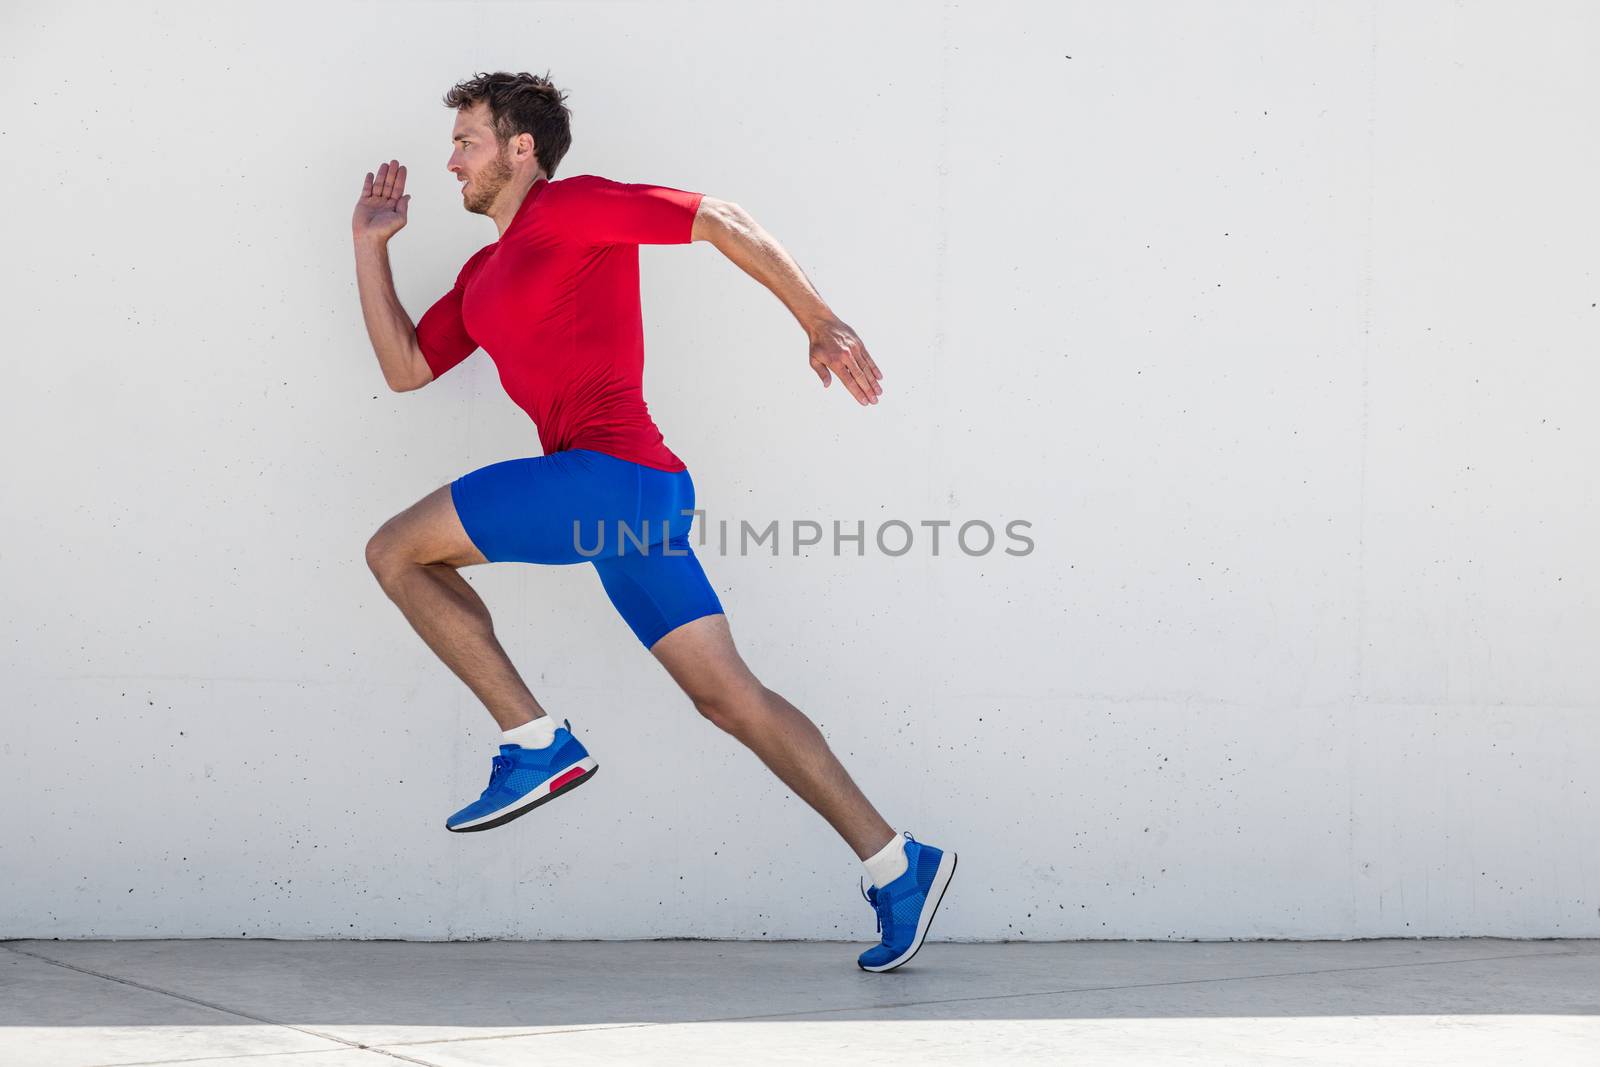 Running man runner training doing outdoor city run sprinting along wall background. Urban healthy active lifestyle. Male athlete doing sprint hiit high intensity interval training.